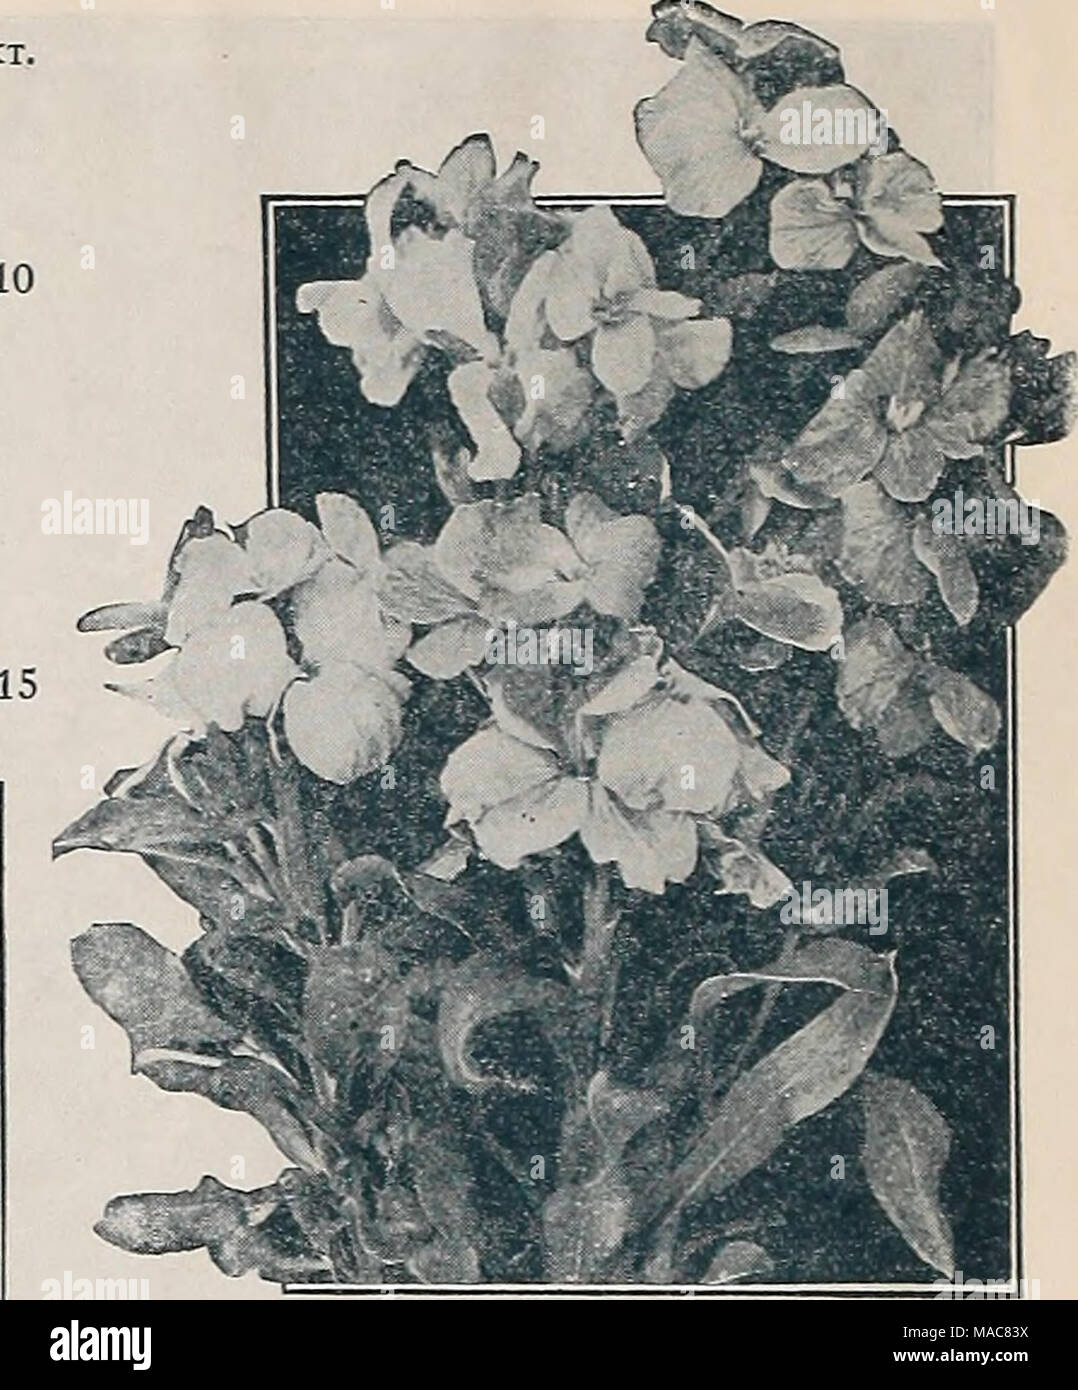 . Dreer's midsummer list 1933 . SlNXLE 'ALl.FLOVER Veronica (Speedweii) PER PKT. 4372 Incana. Bright silvery foliage, blue flowers; July and August; 1 foot. A splendid variet' for the rockery. Special pkt, 60 cts ' .$0 20 4374 Maritima('Xo;;g!Yo//a). Averypretty Speedwell growing about 2 feet high and producing long spikes of blue flowers from July to September, i oz., 50 cts 10 4375 Repens. A useful rock or carpet- y^^-,-^^ ing plant, with light blue flowers; May and June. Special pkt., 75 cts. 25 4376 Spicata. An elegant hardy border plant, growing about IJ feet high, producing long spik Stock Photo